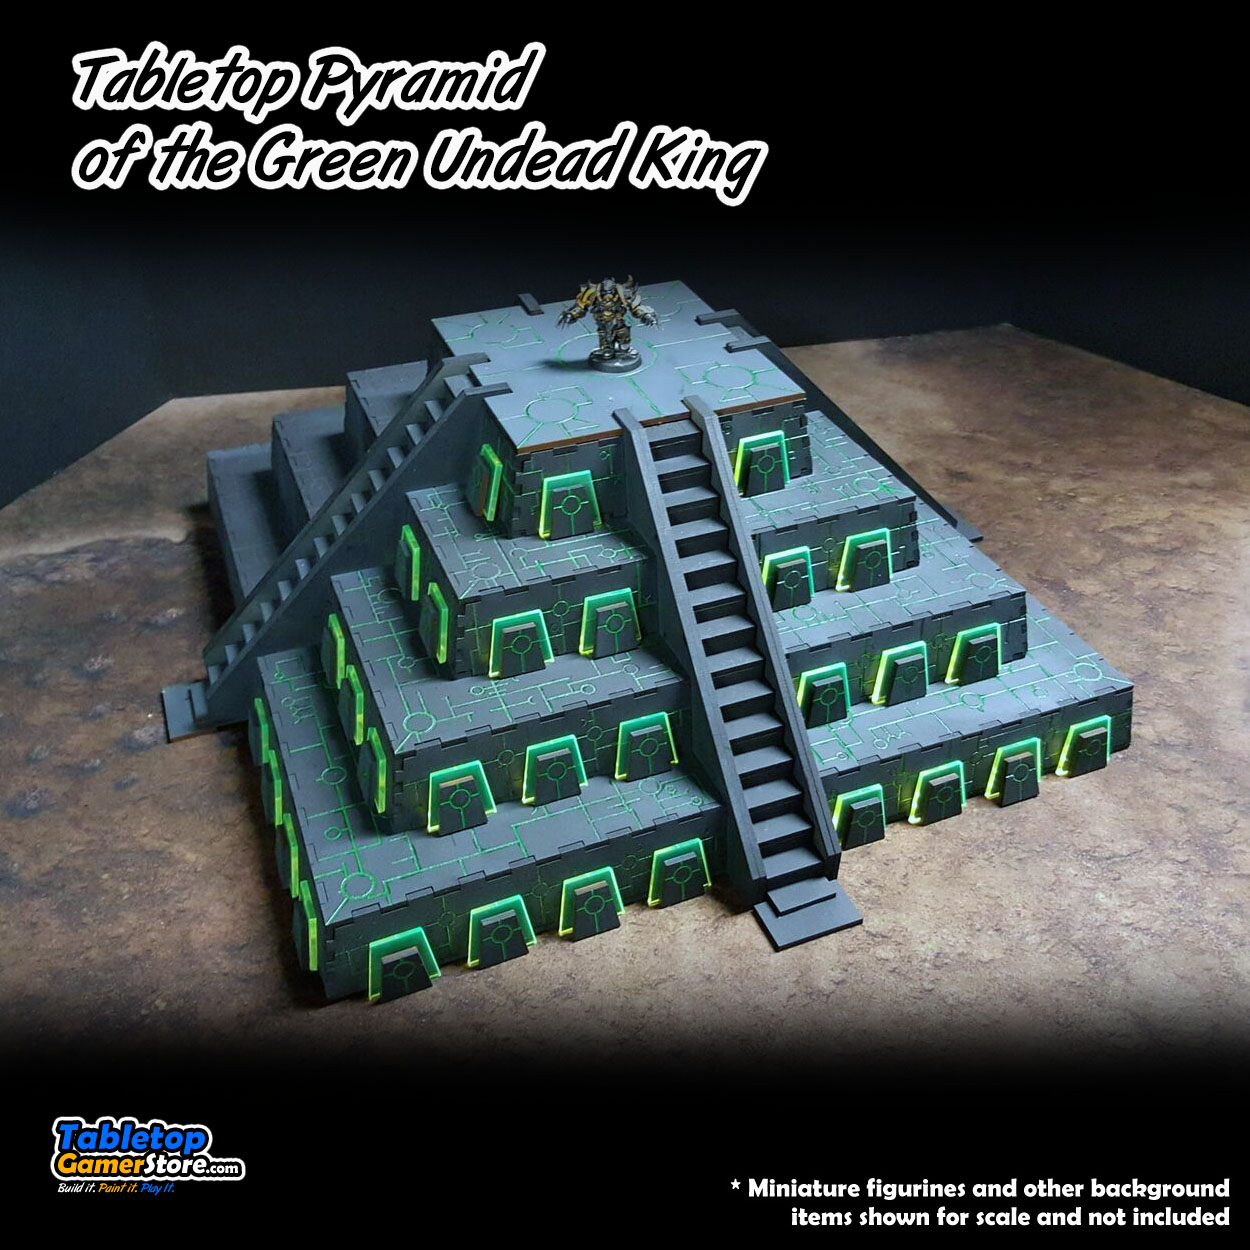 tabletop_pyramid_green_undead_king_03